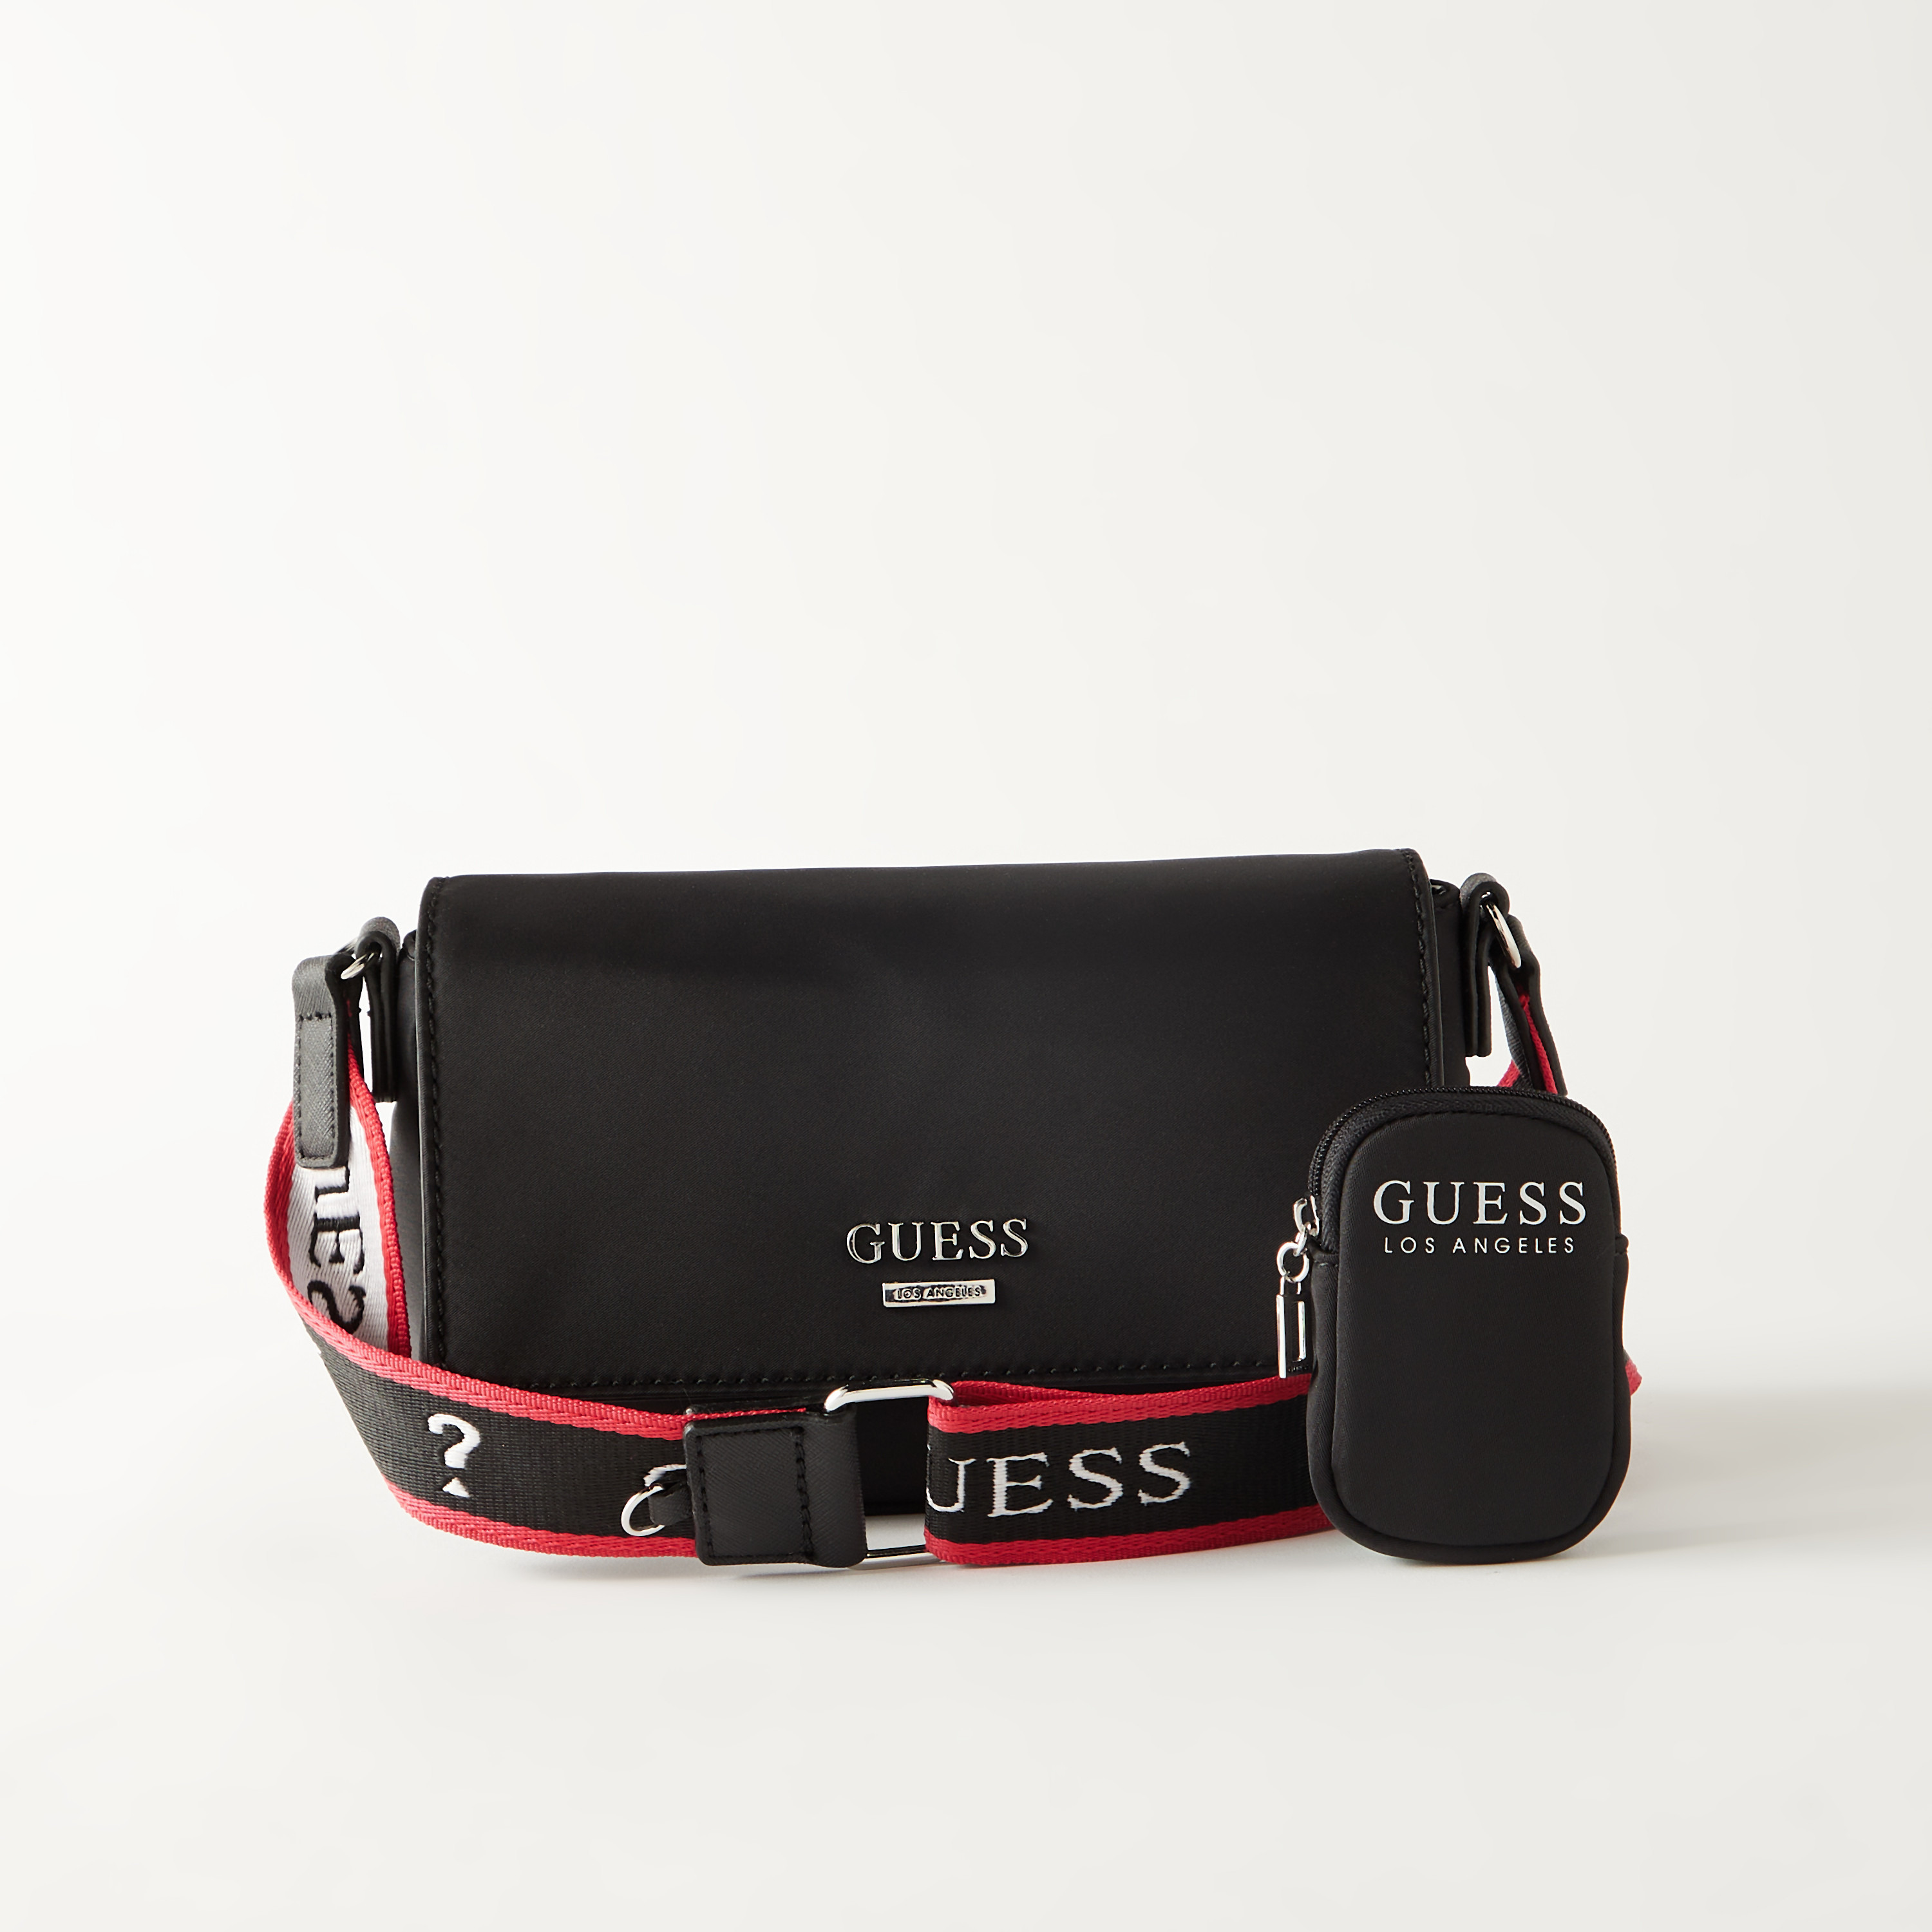 Guess Black Mika Double Pouch Crossbody Bag at FORZIERI